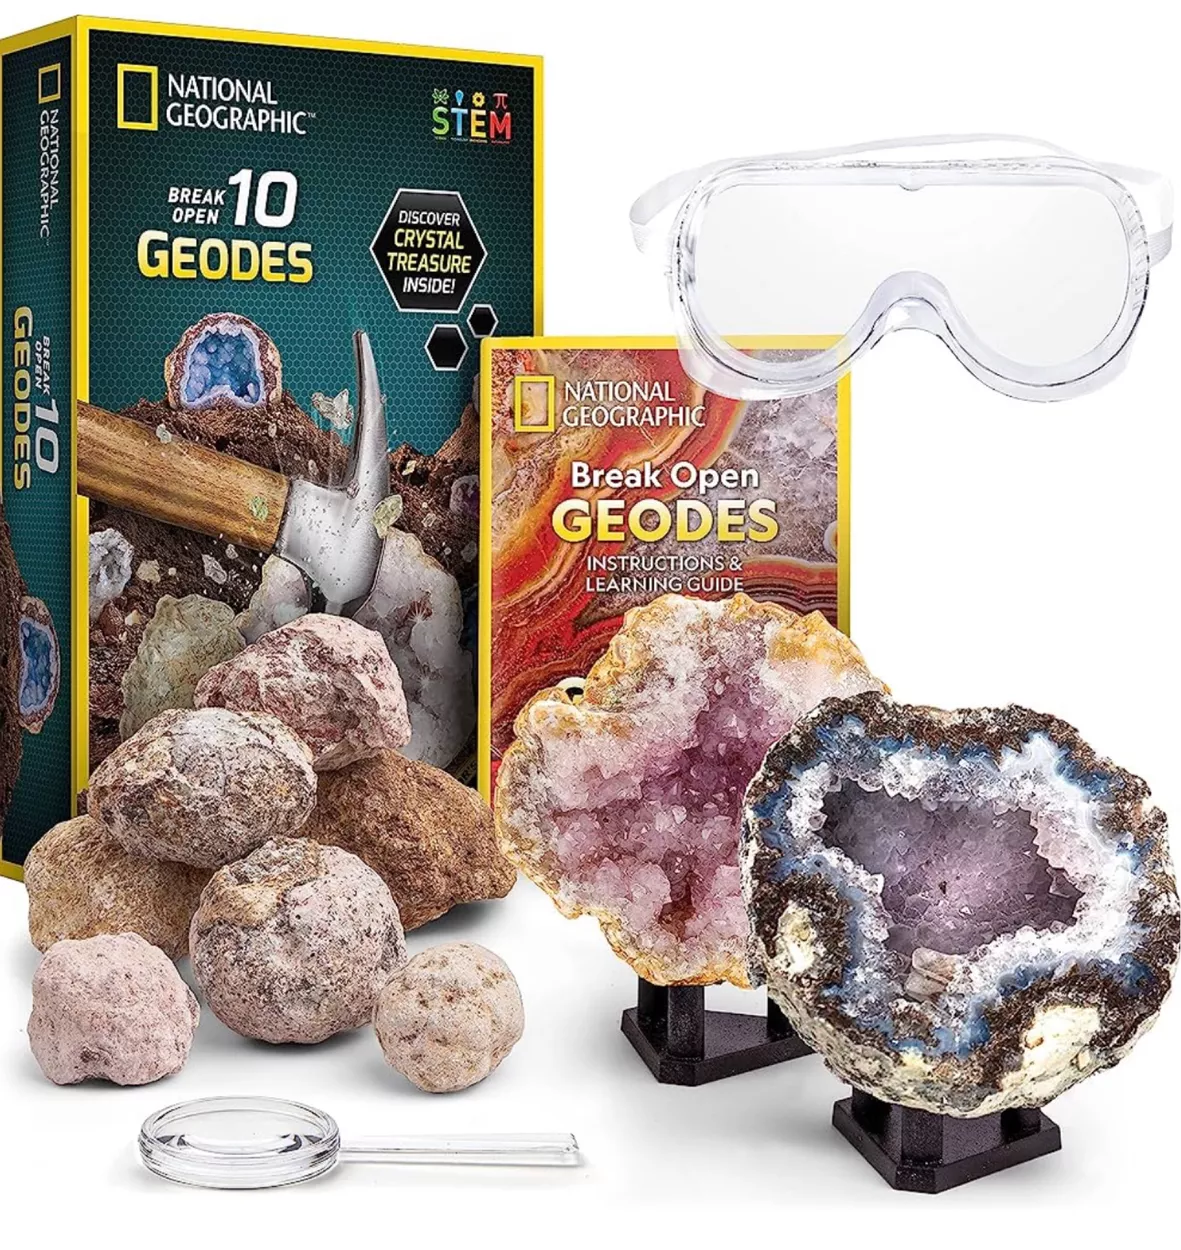 National Geographic's Mega Science STEM kits for kids are 30% off